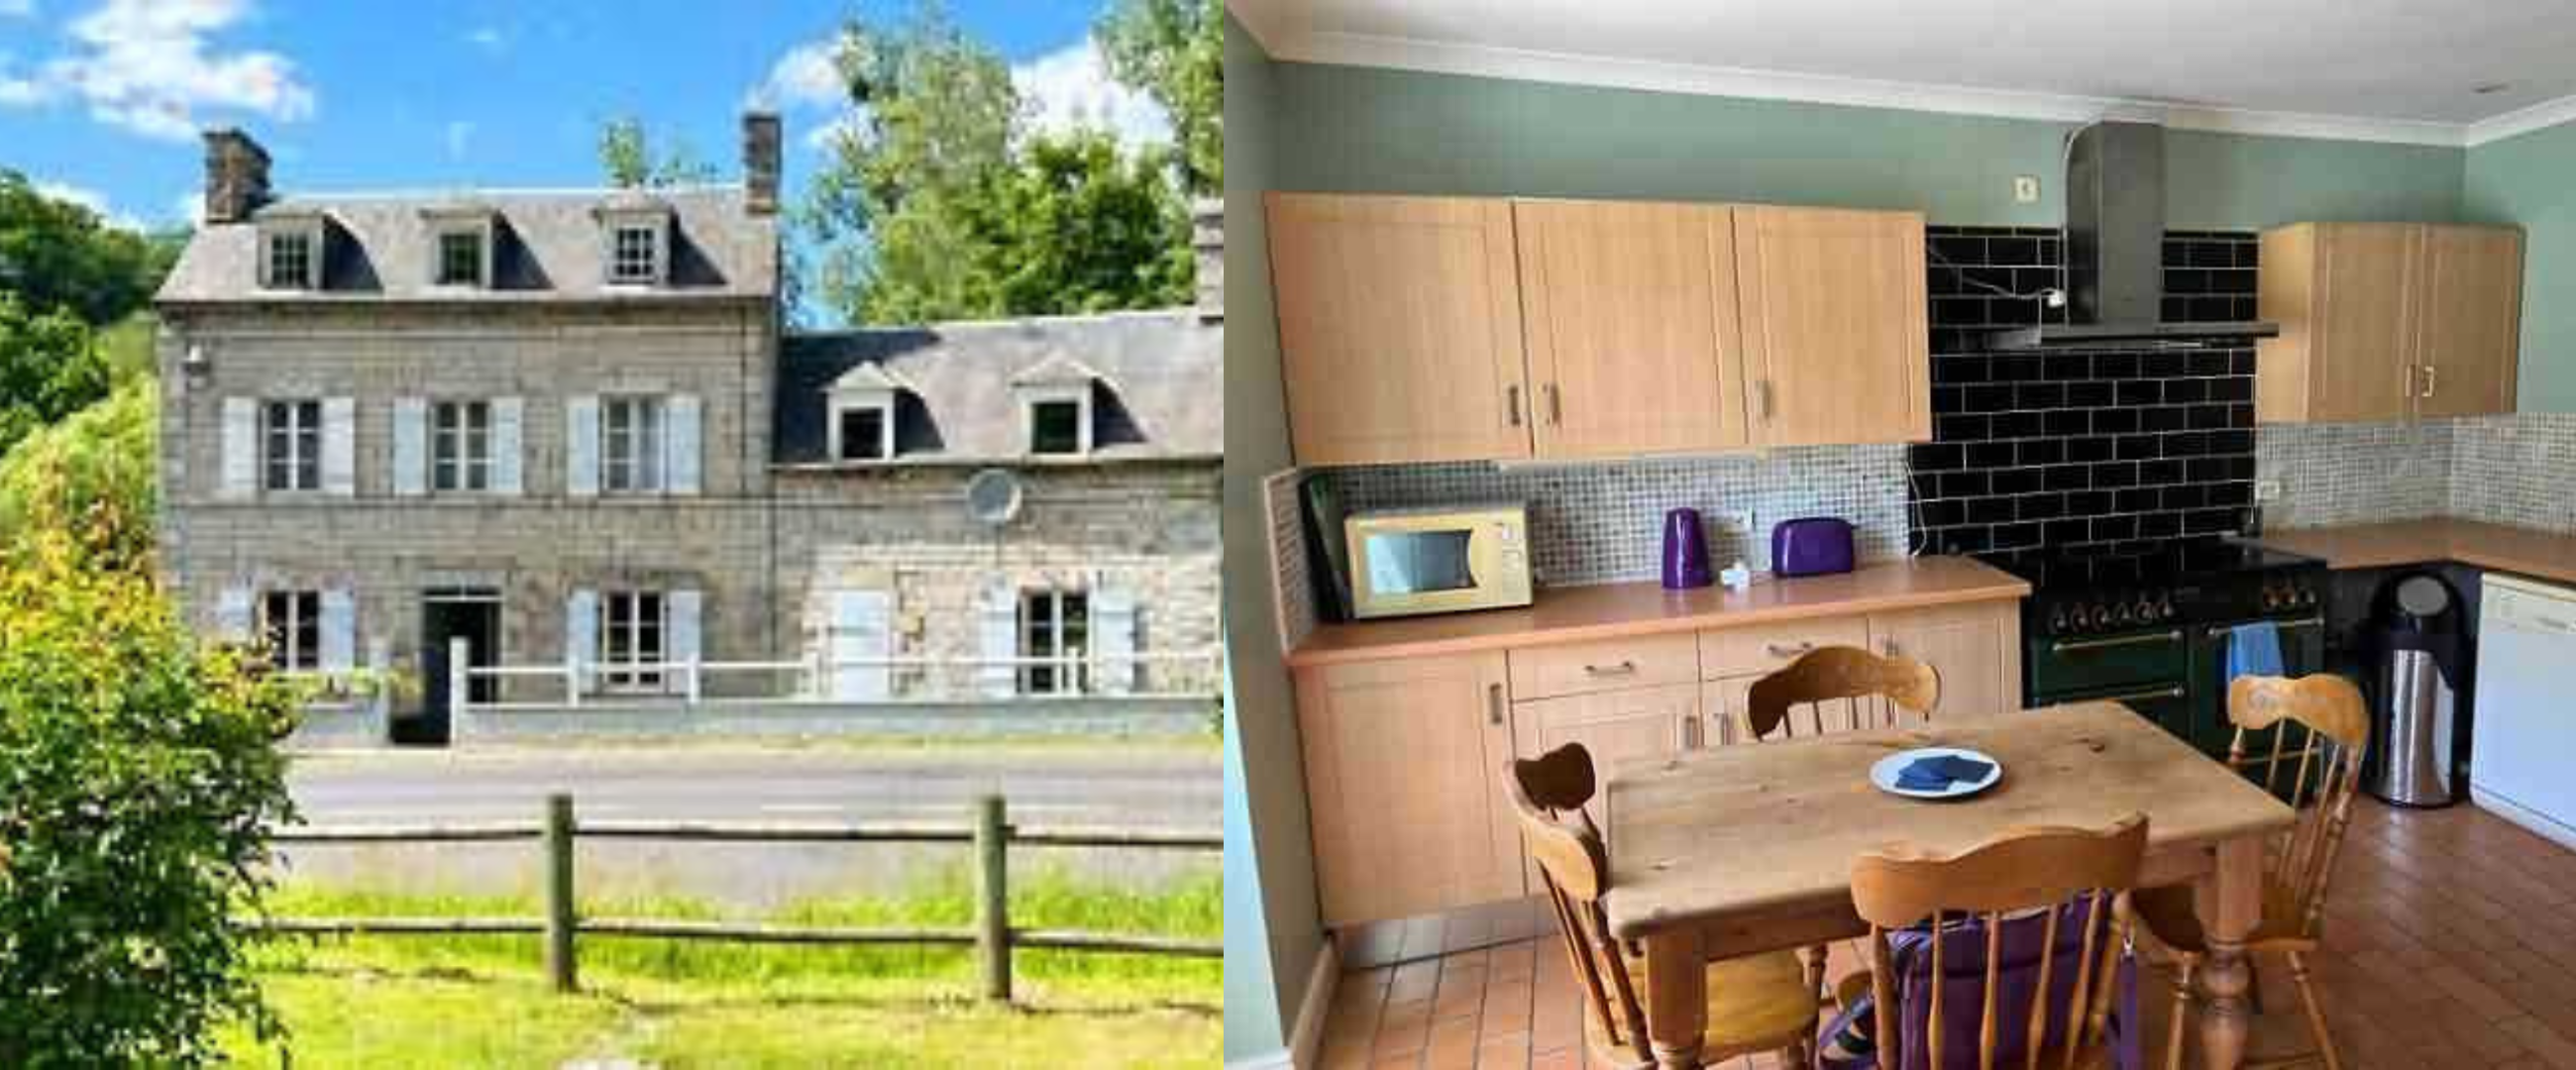 House for sale in Orne, Normandy